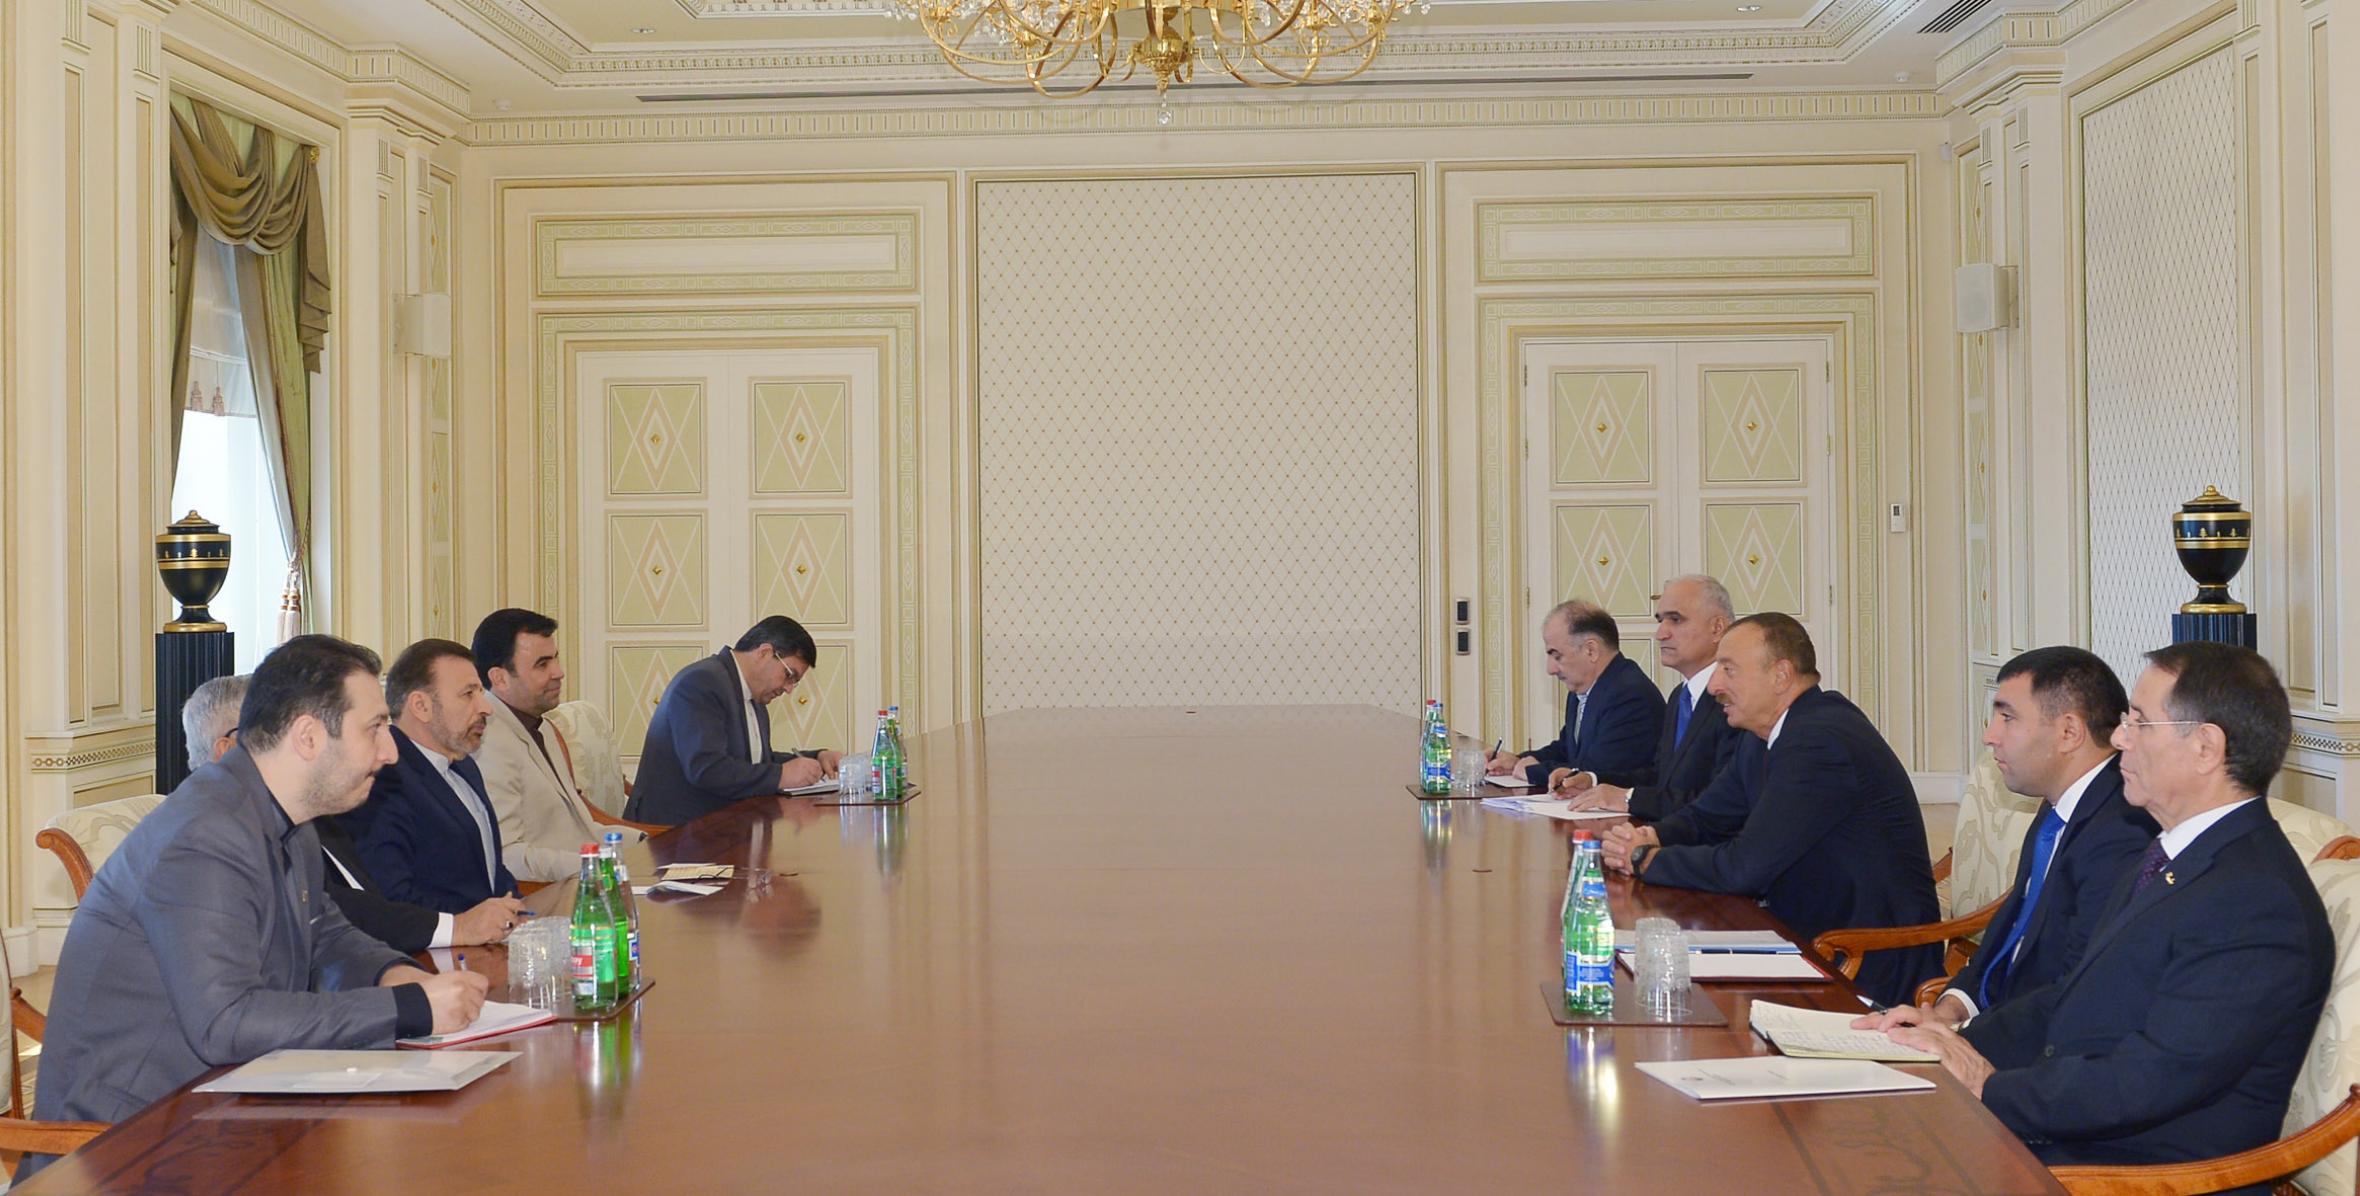 Ilham Aliyev received a delegation led by the Iranian Minister of Communications and Information Technology